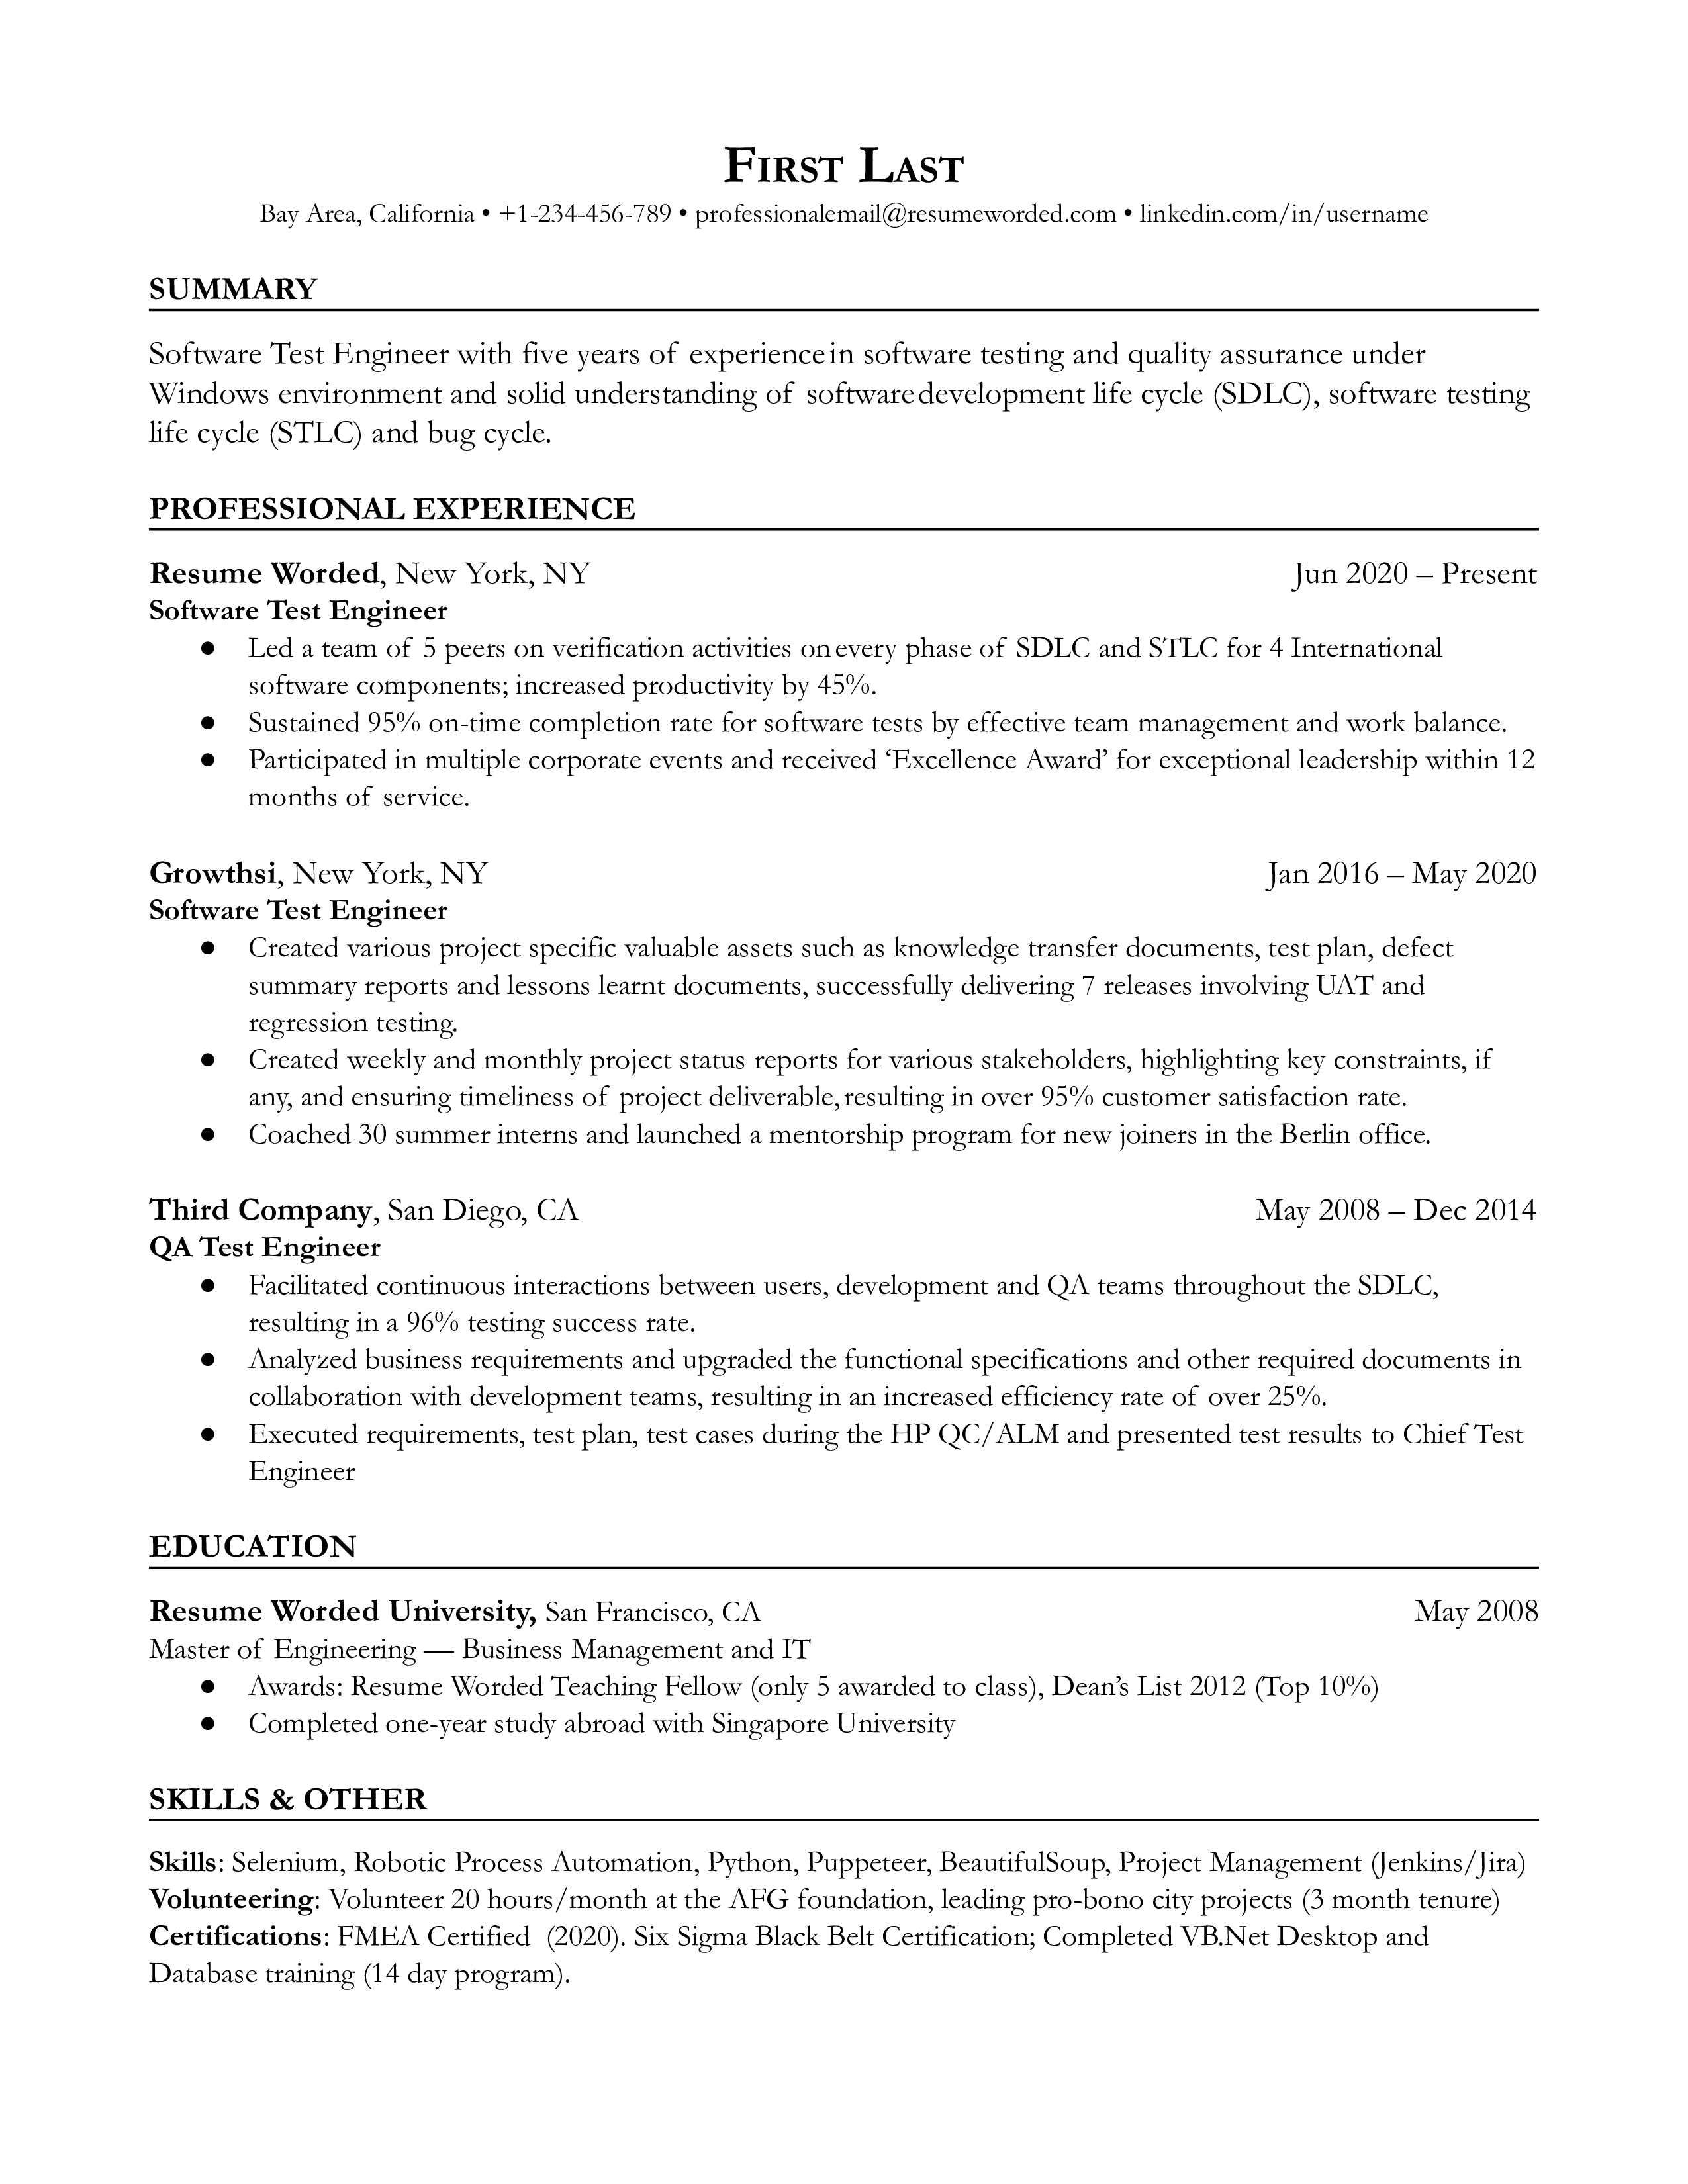 A software test engineer resume showcasing technical skills and testing methodologies.